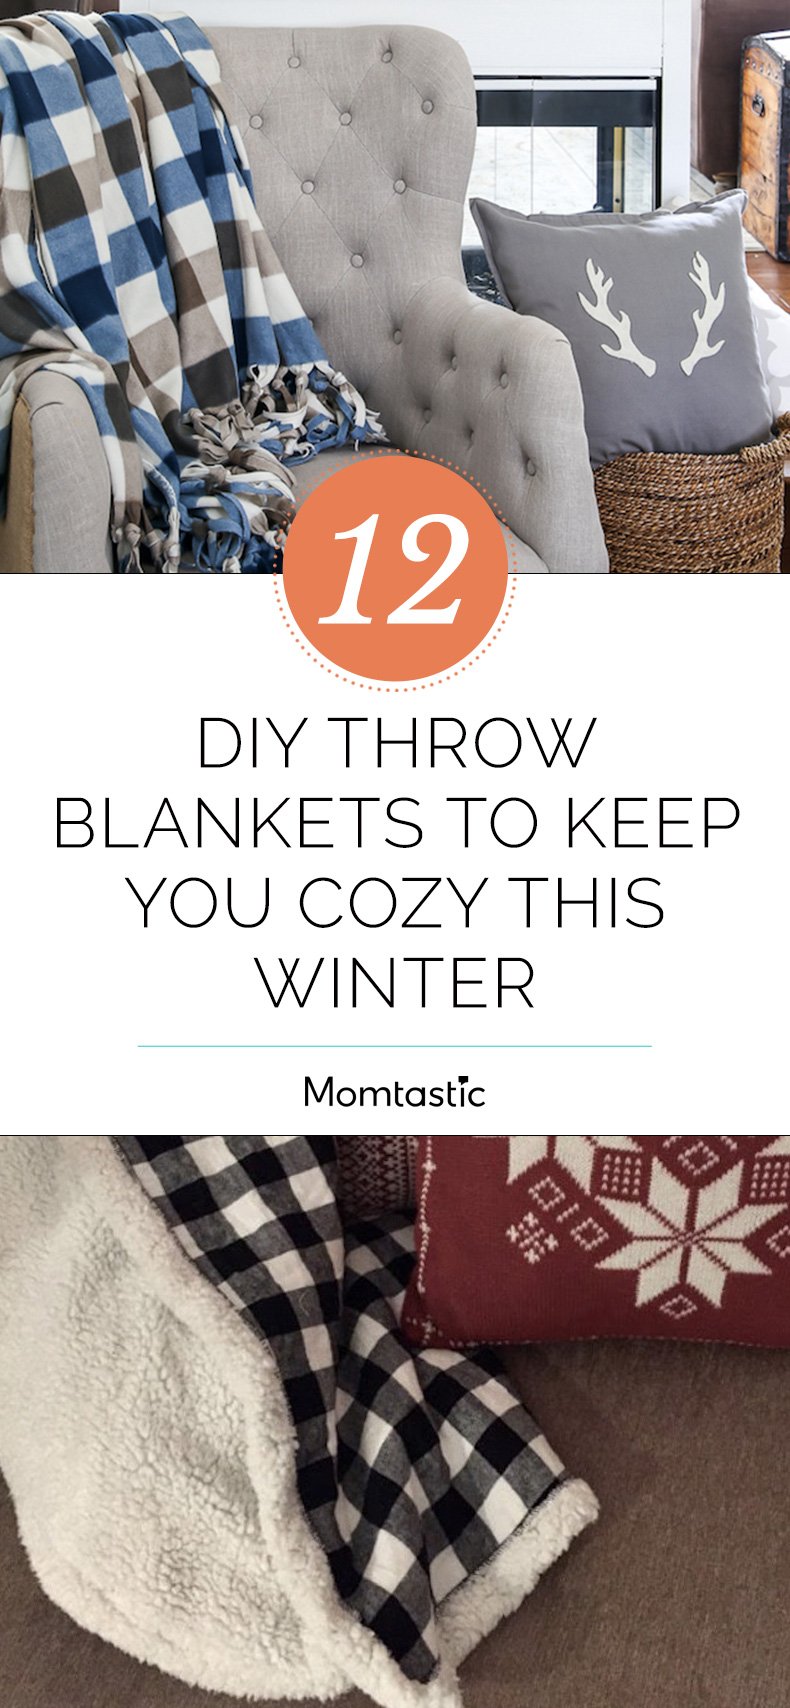 12 DIY Throw Blankets to Keep You Cozy This Winter